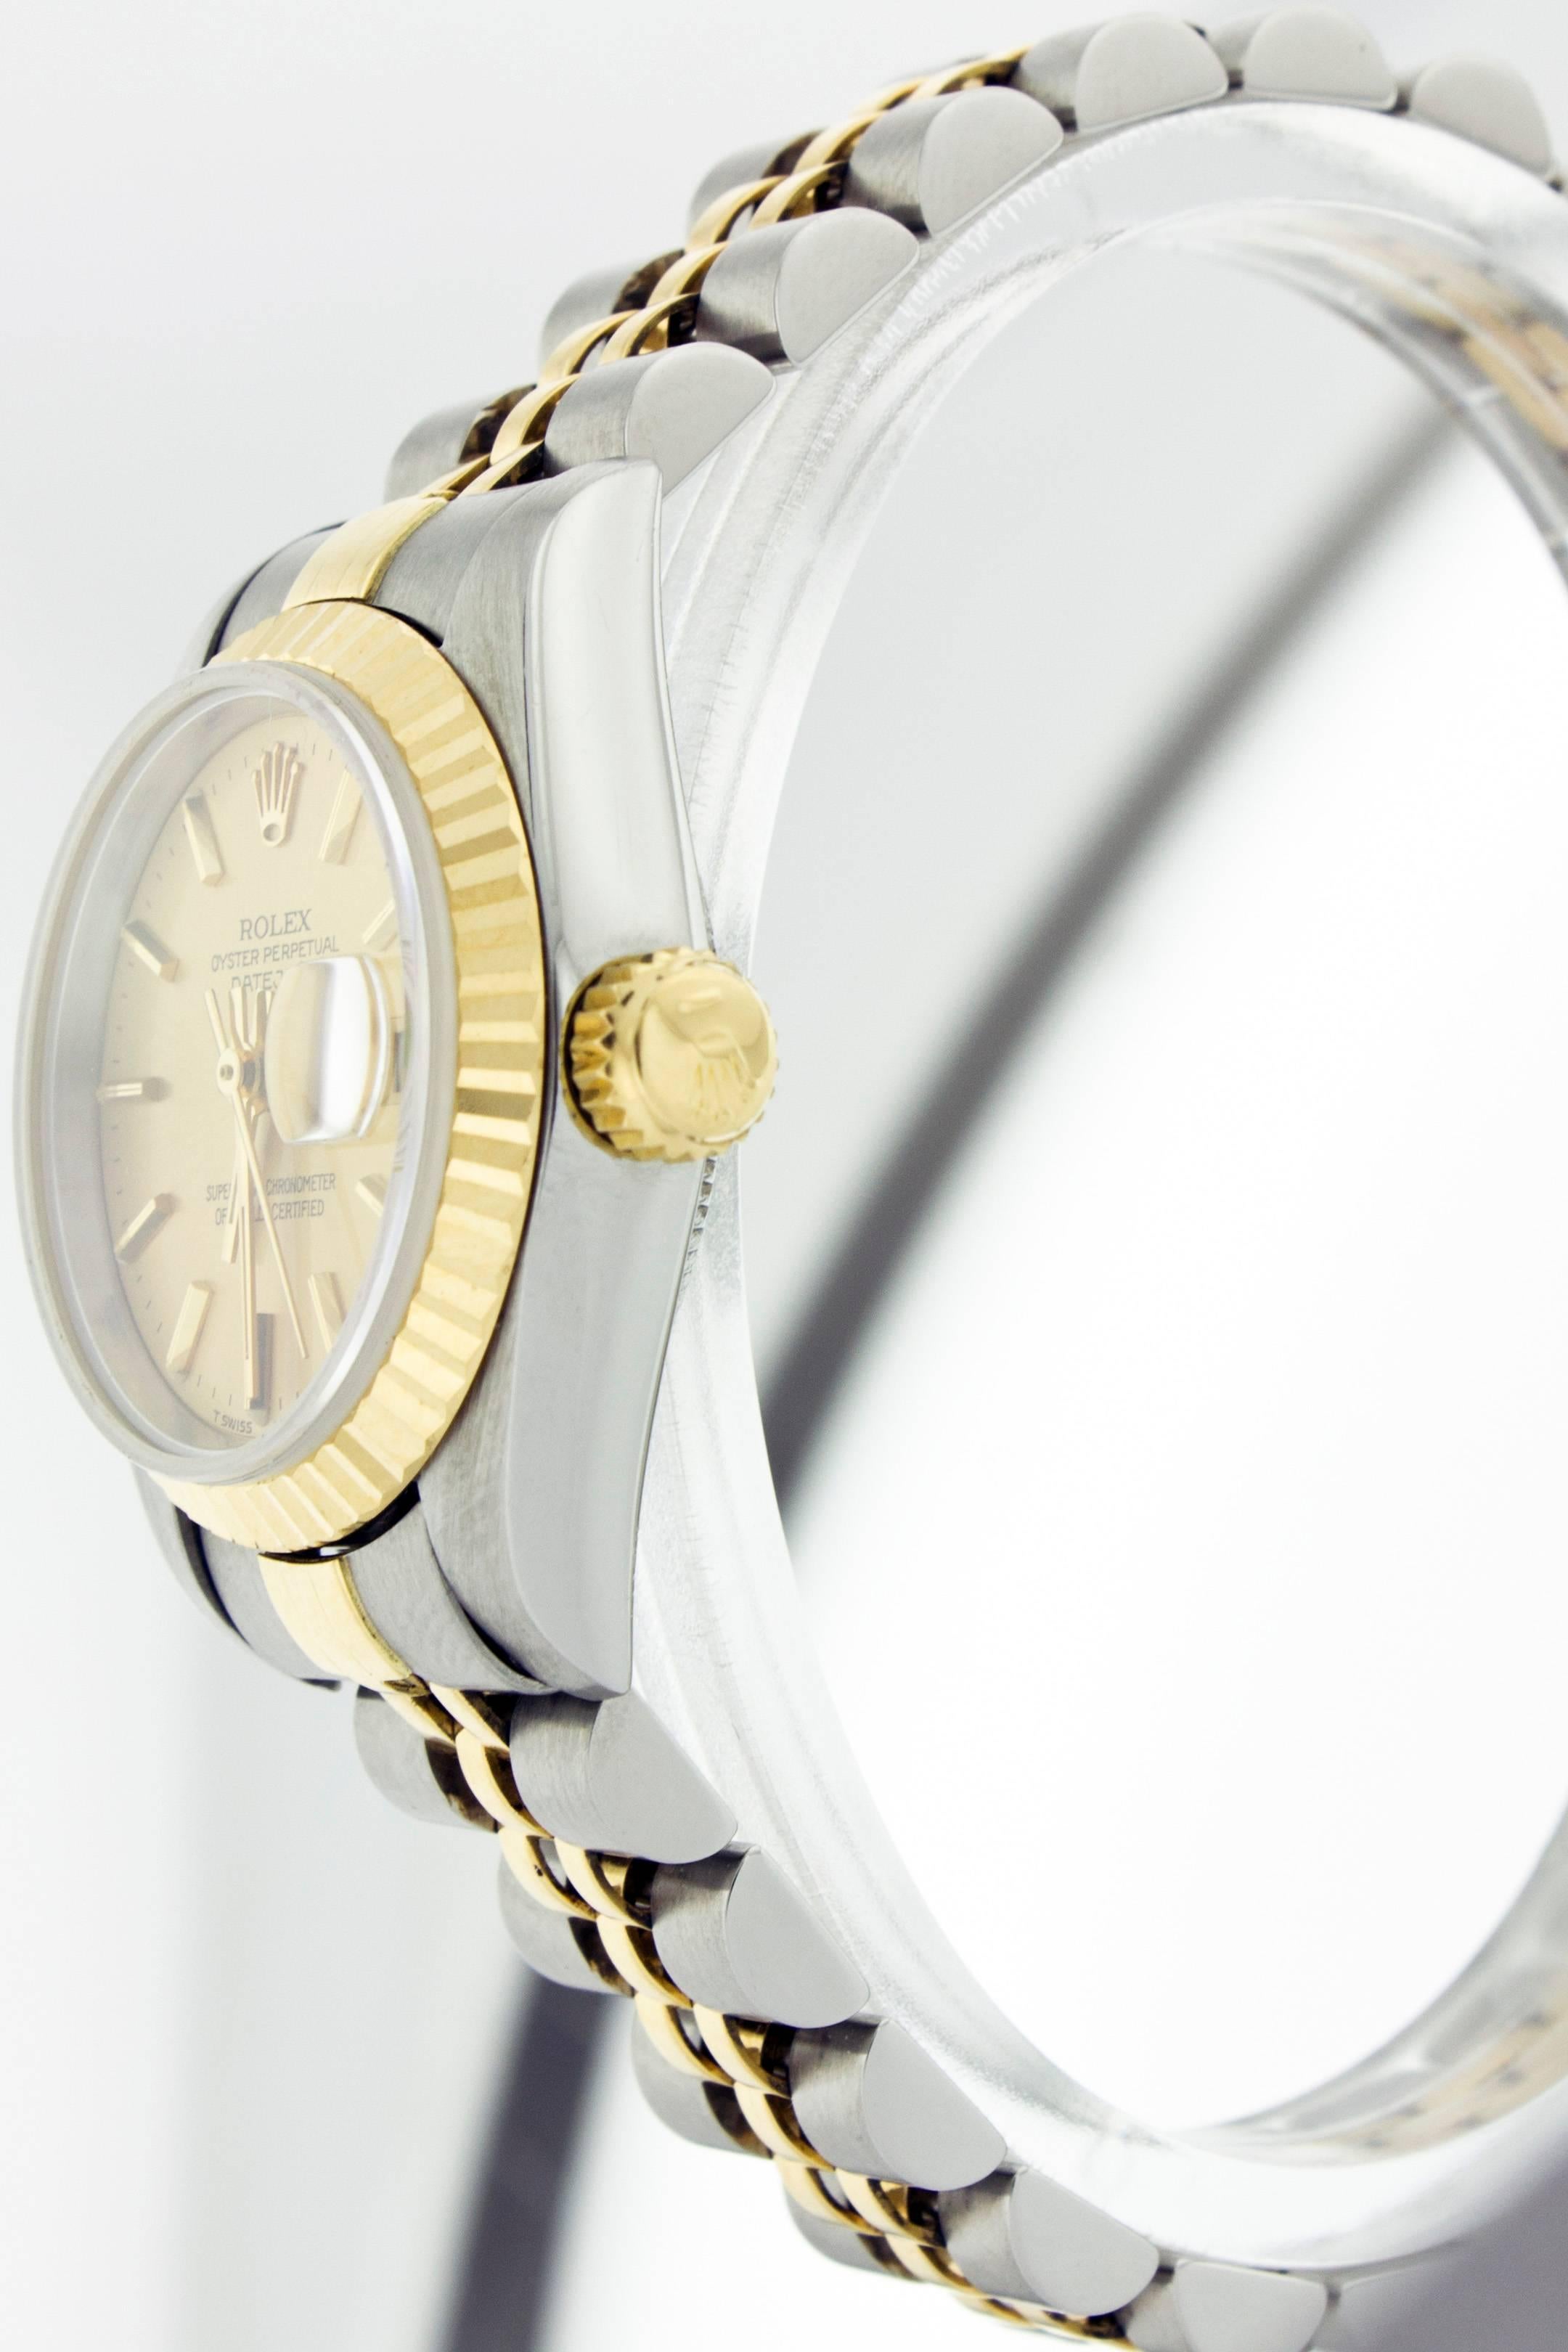 Women's Rolex Lady's Yellow Gold Stainless Steel Datejust Wristwatch Ref 69173 For Sale